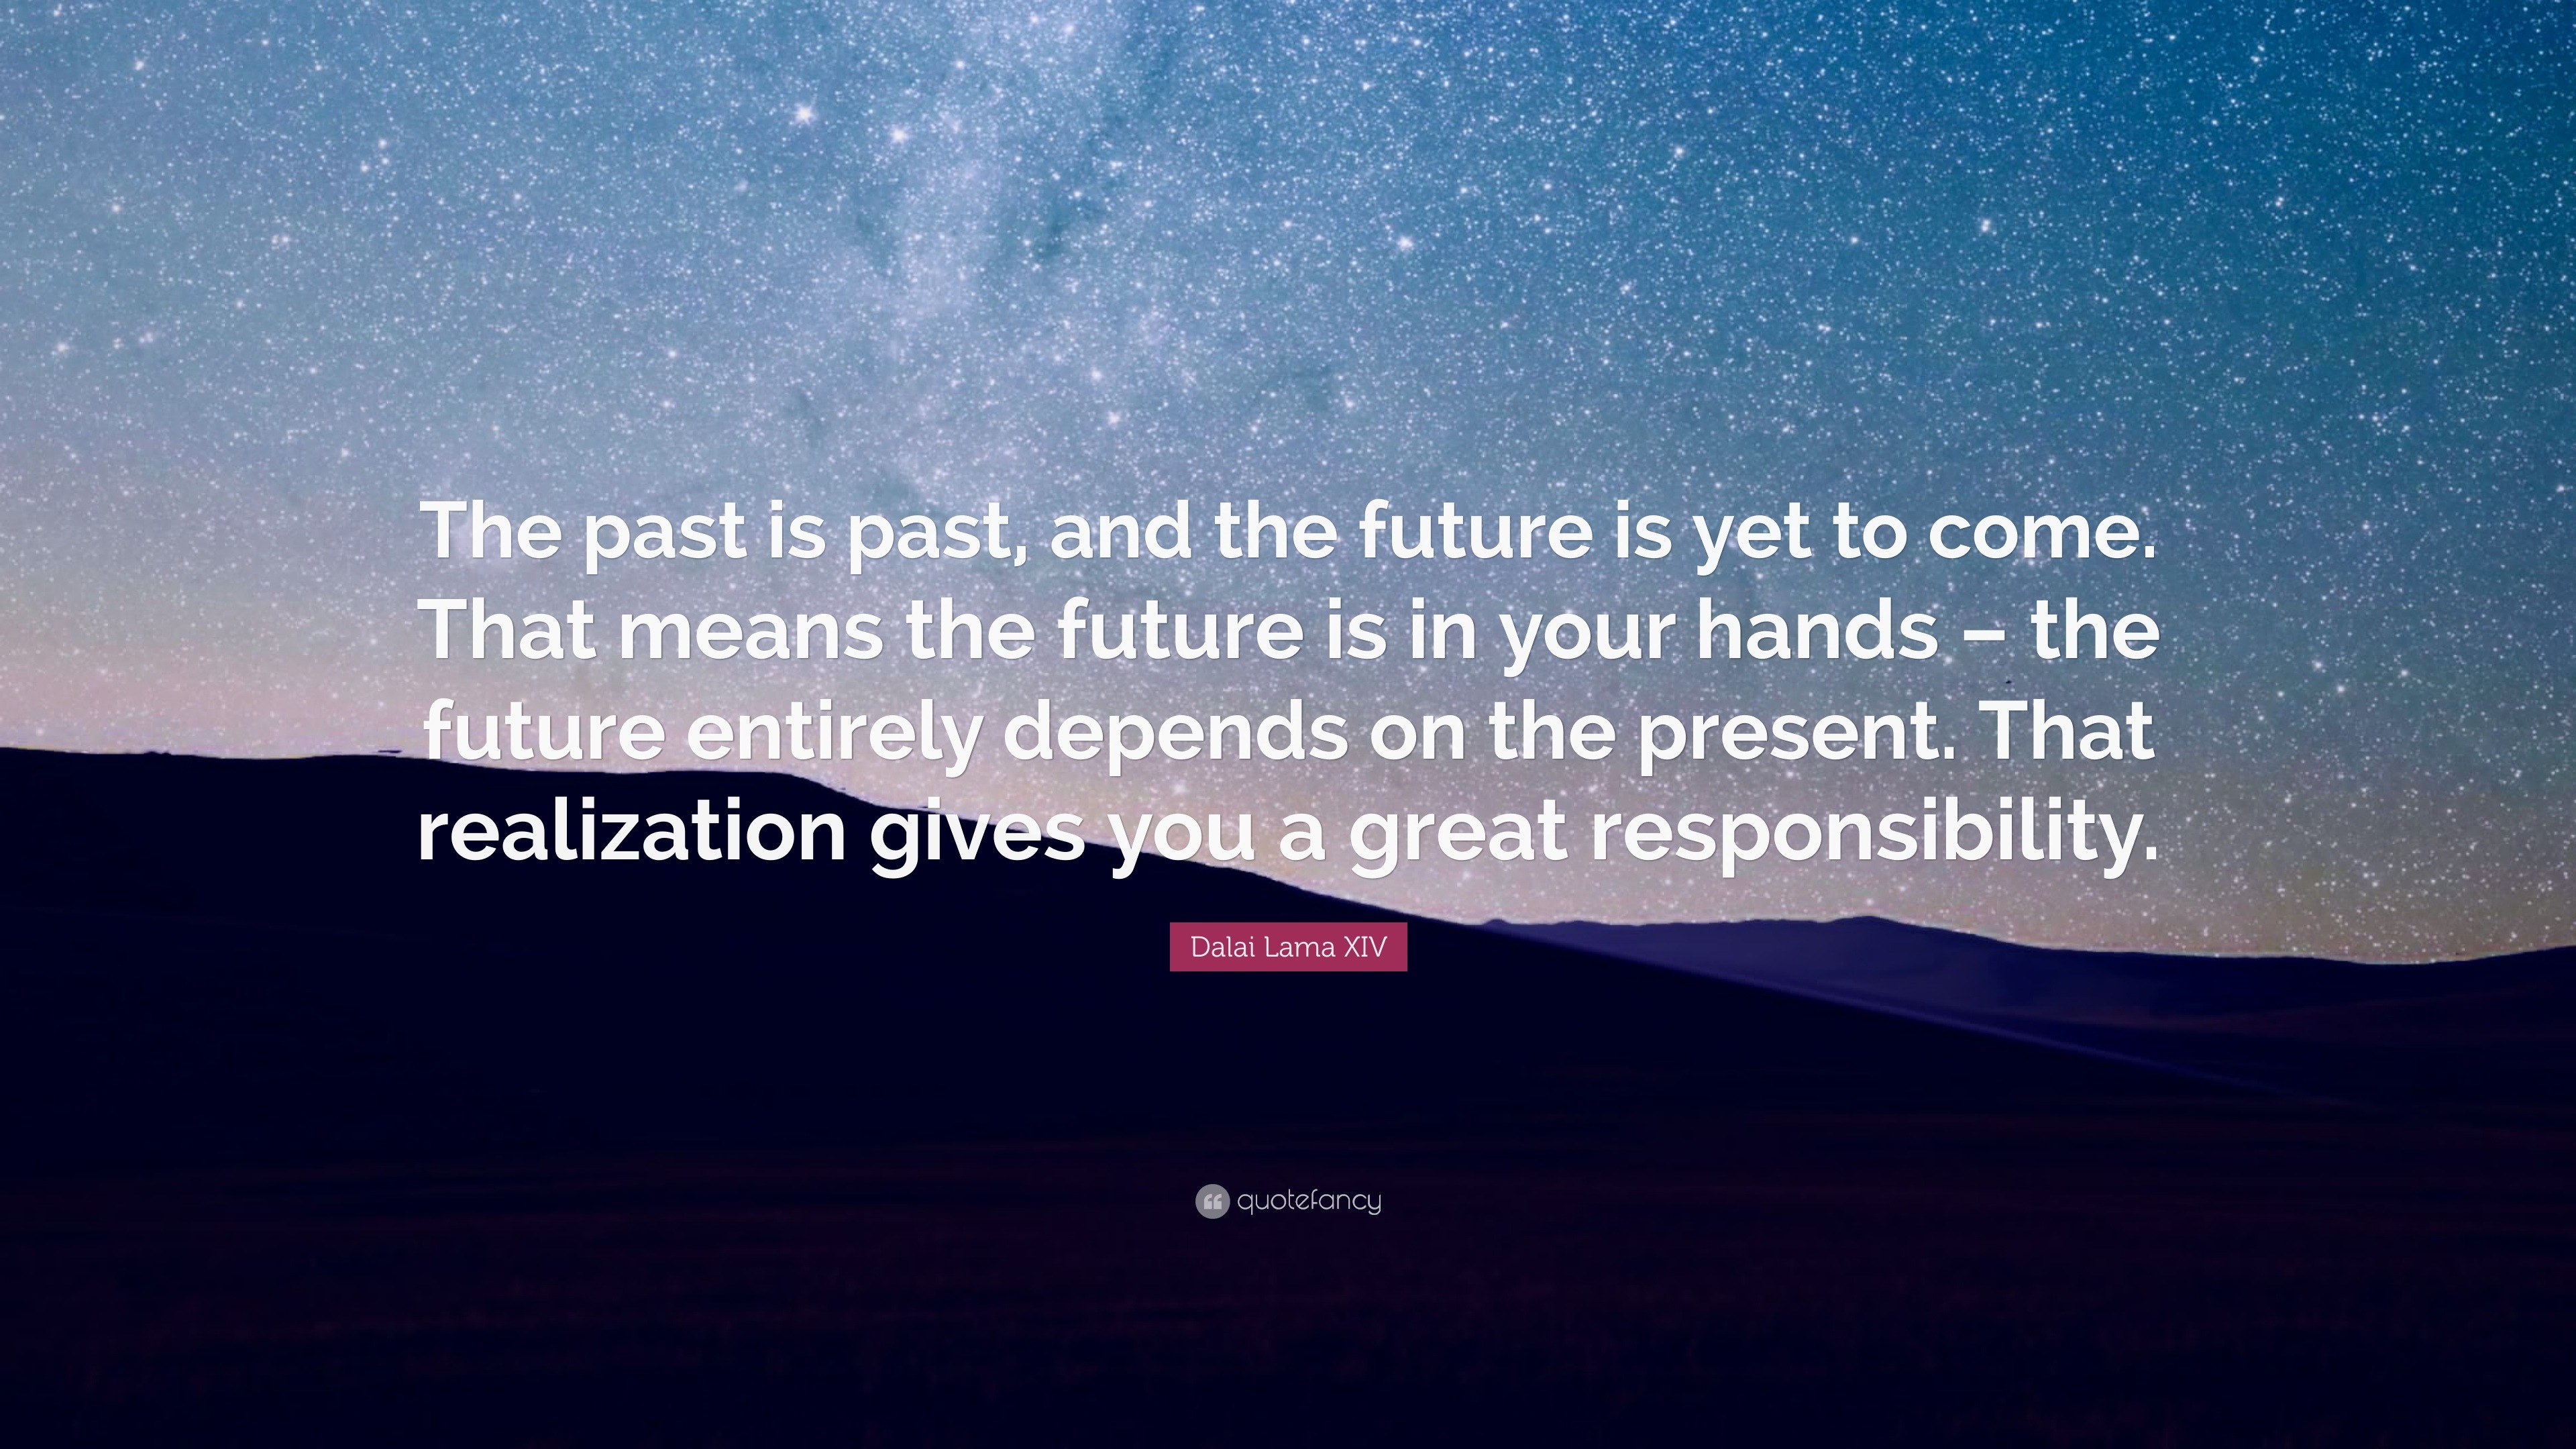 Dalai Lama Xiv Quote “the Past Is Past And The Future Is Yet To Come